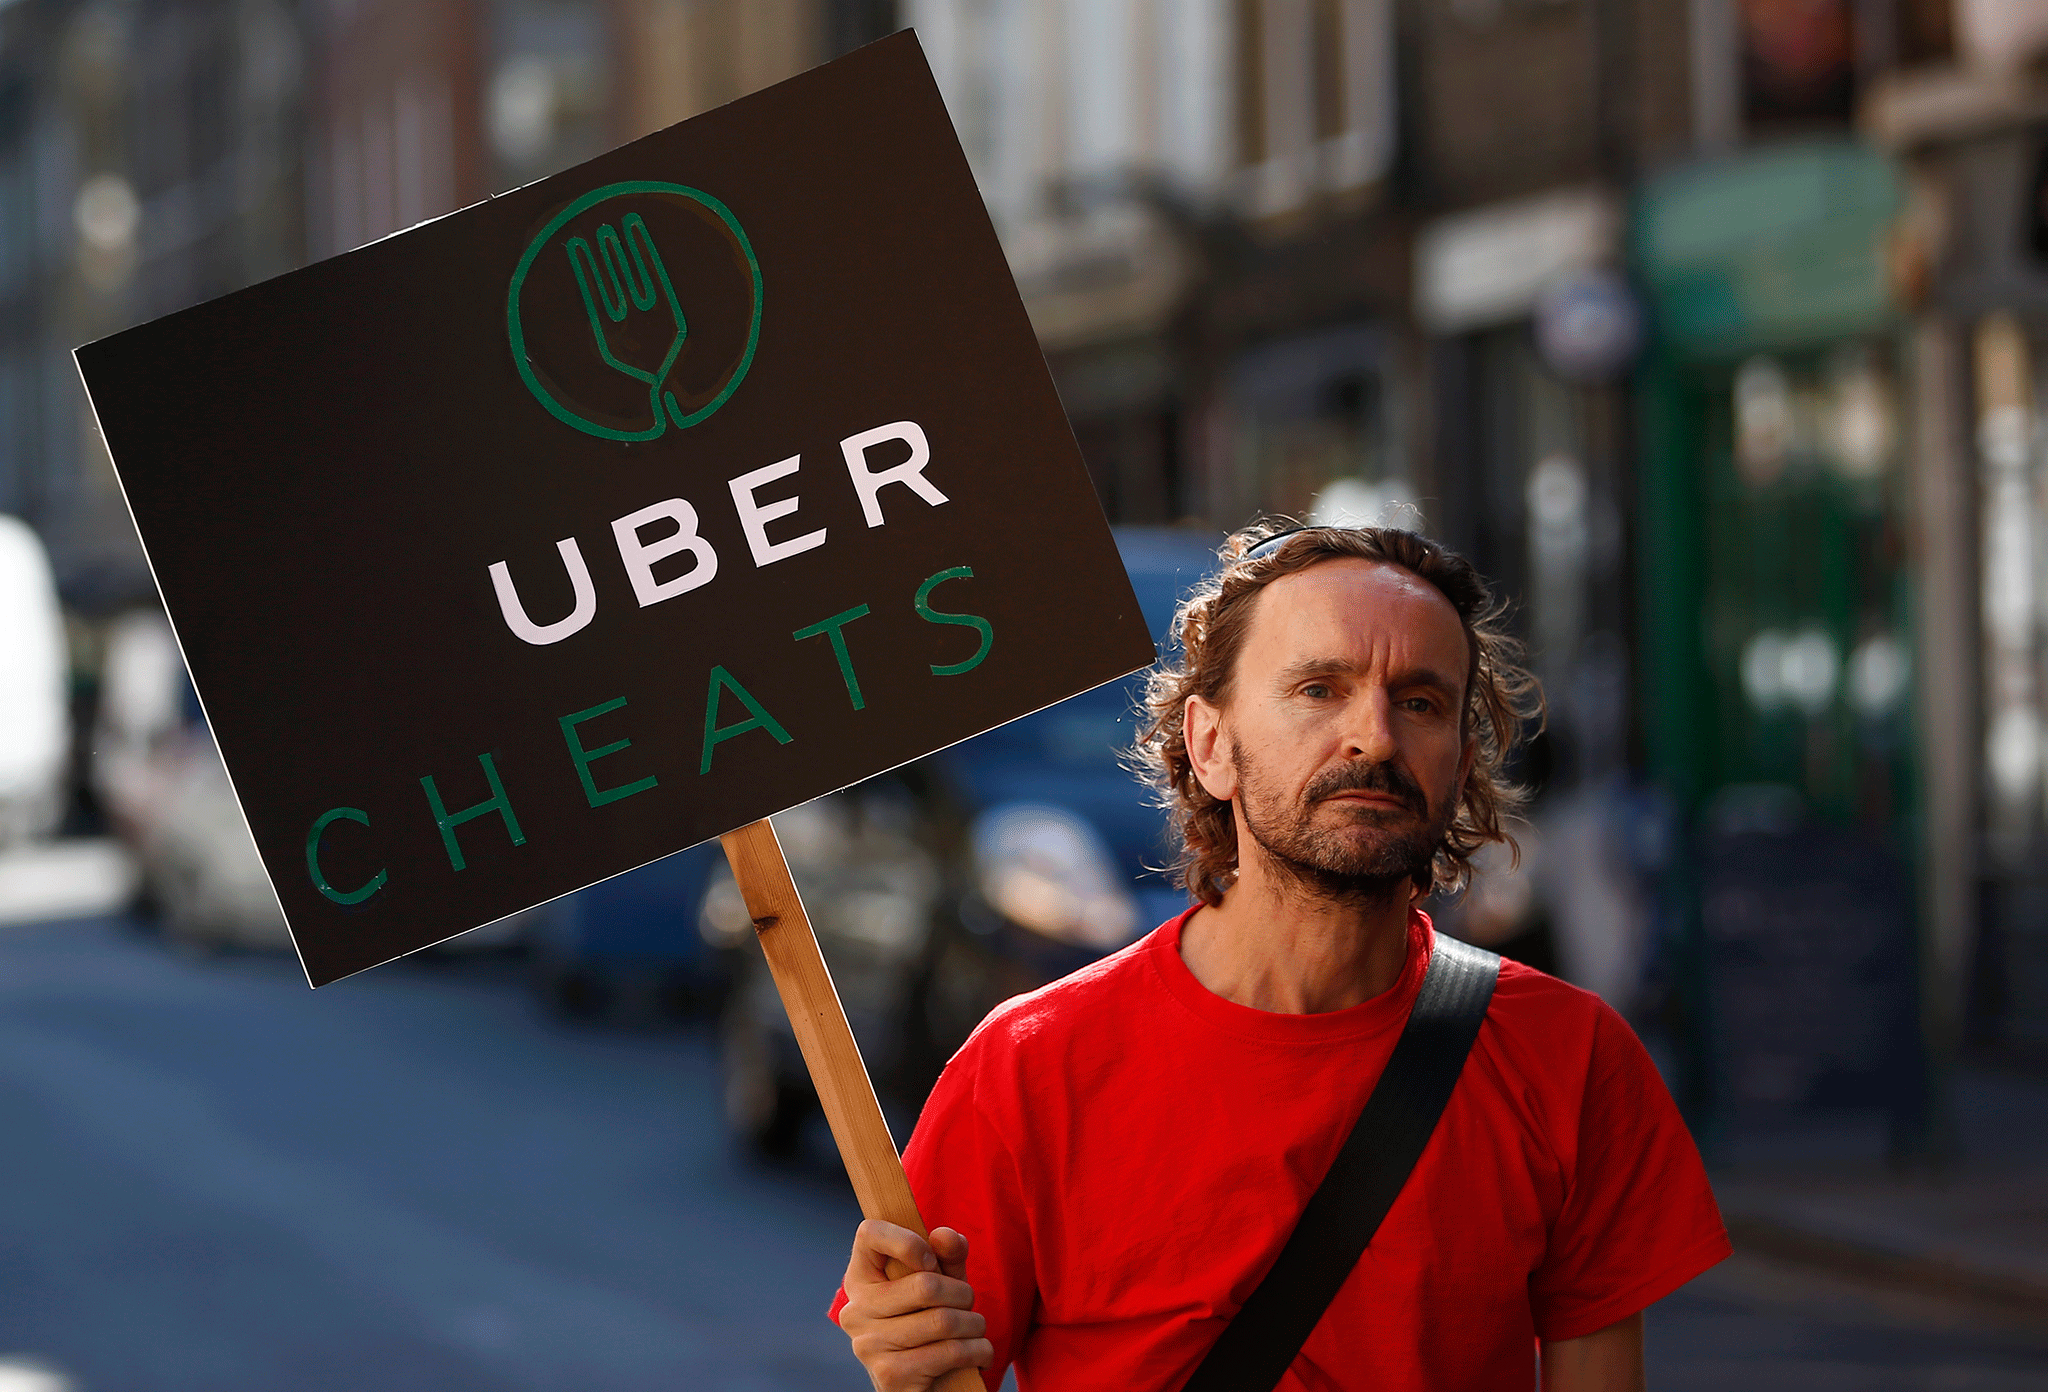 a protest by UberEATS workers protest over pay and conditions, outside the company's offices in London, August, 2016